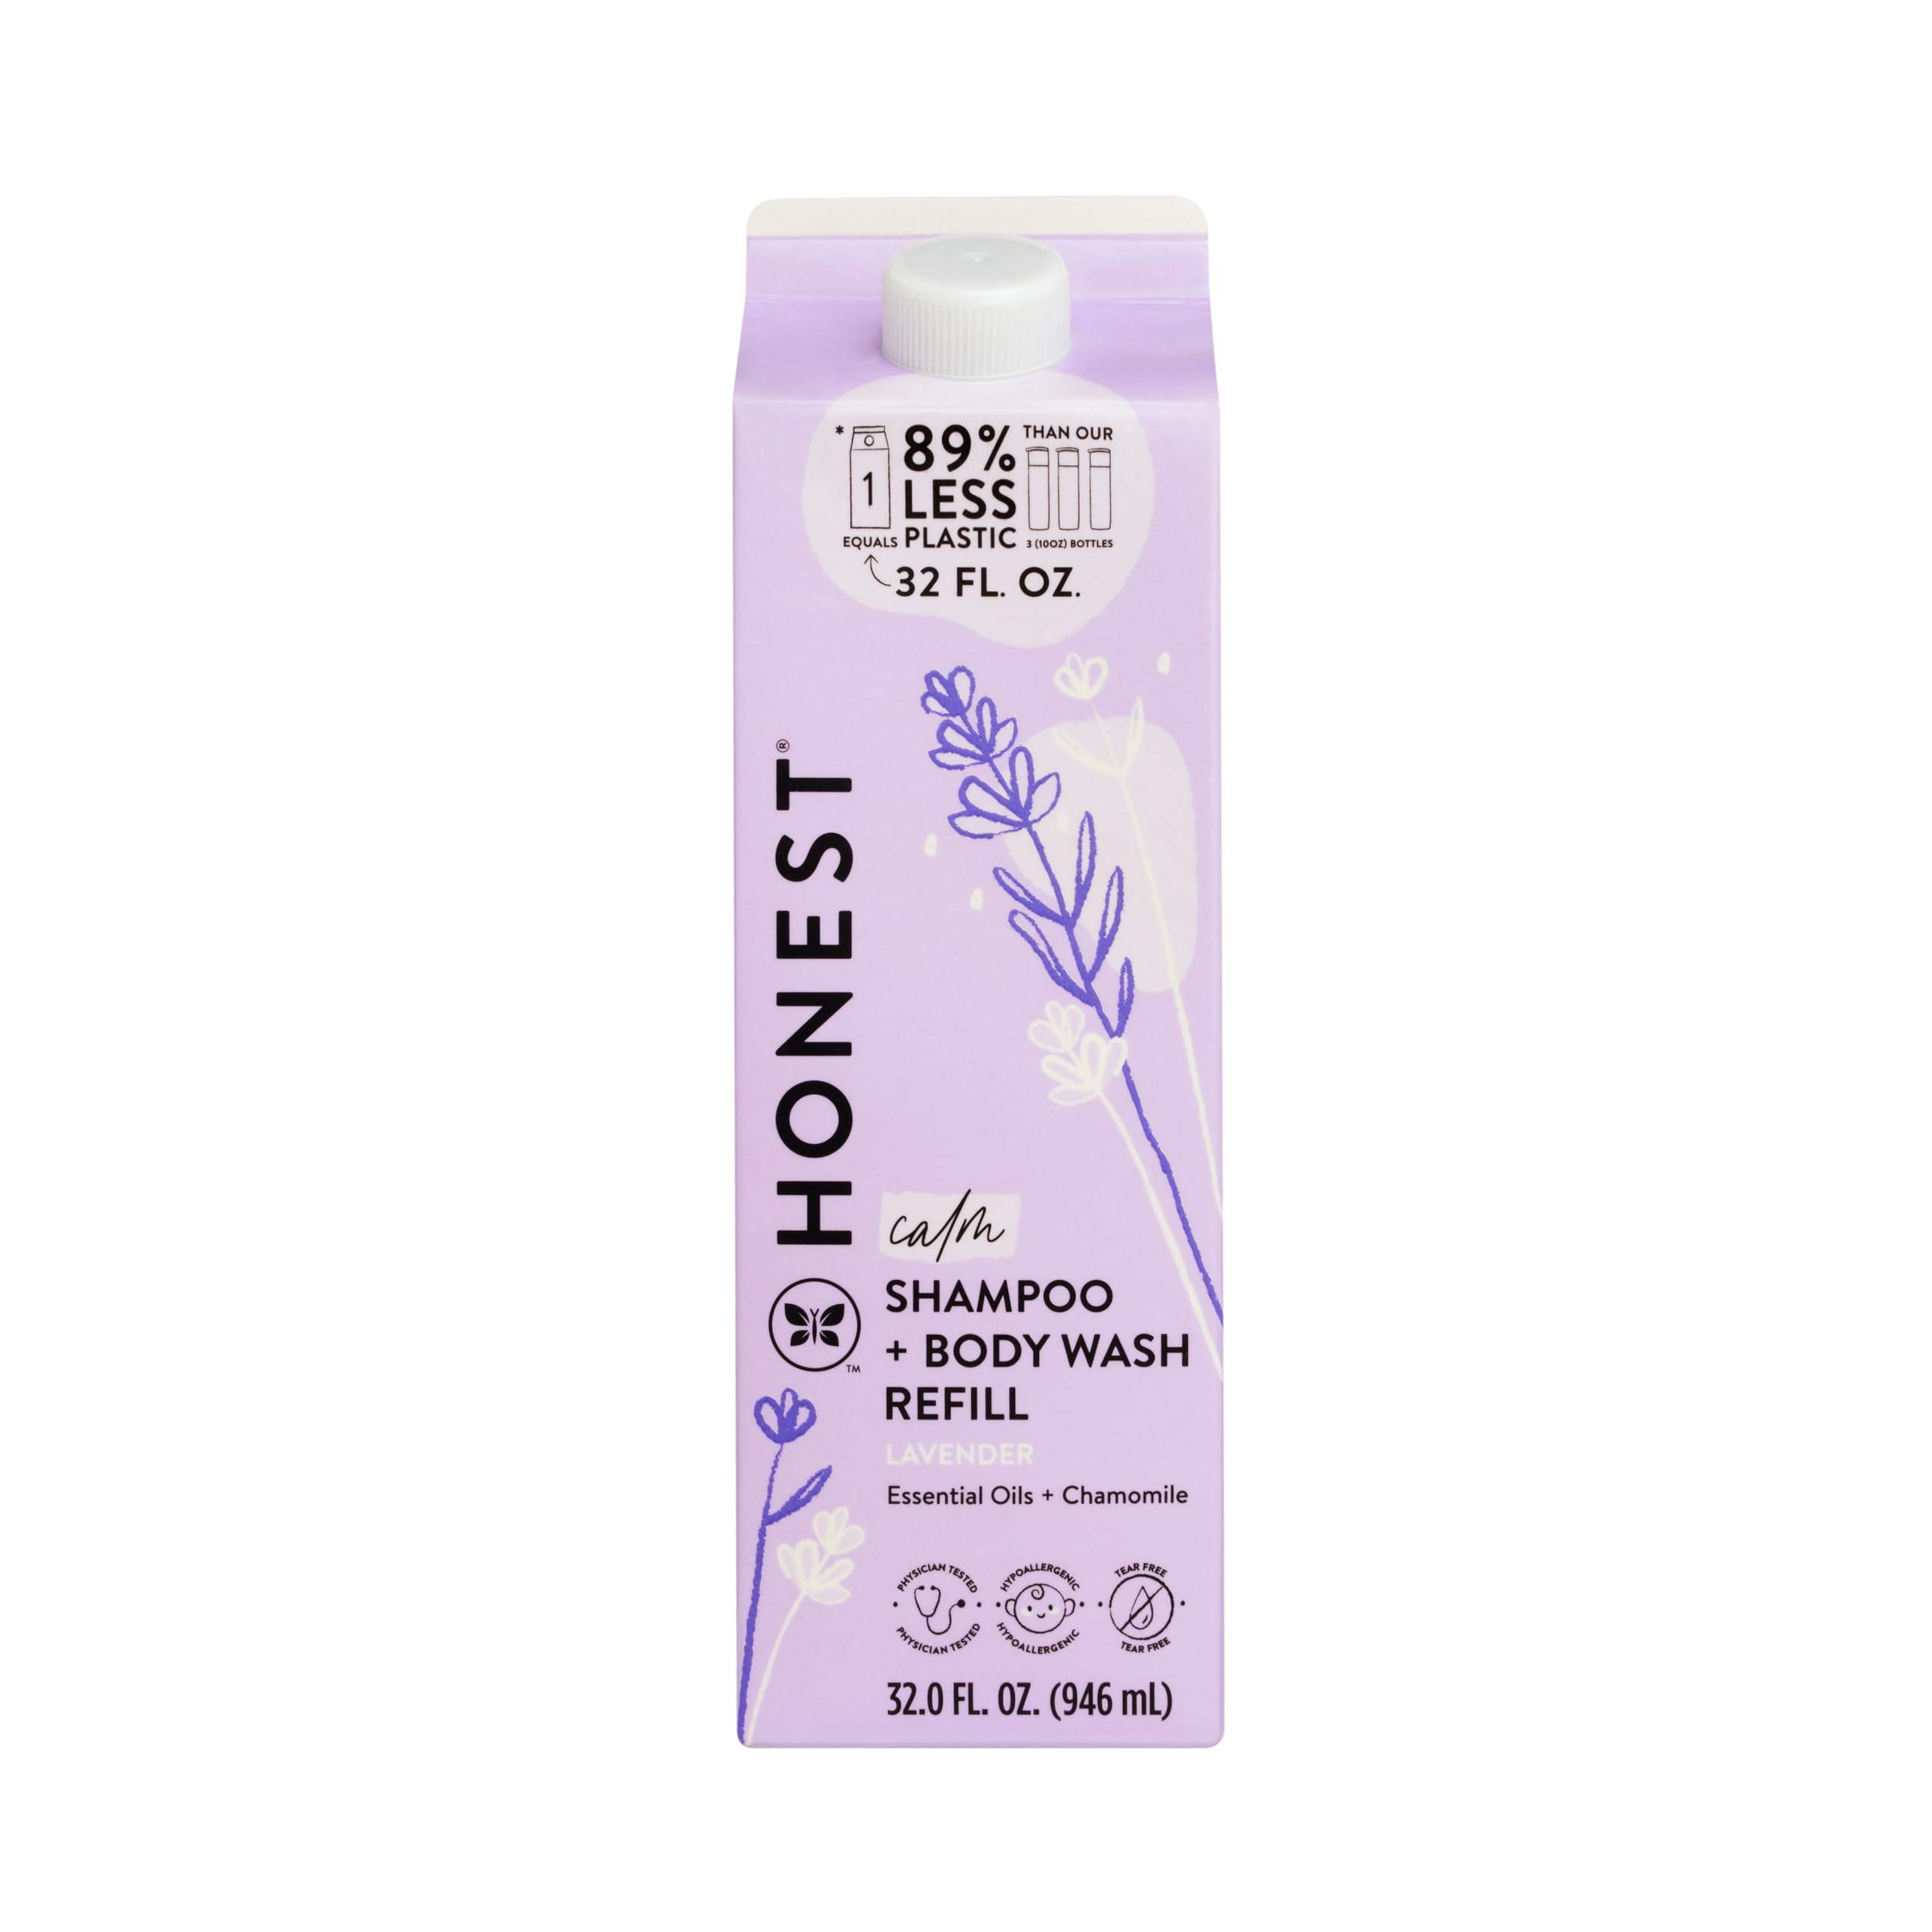 The Honest Company 2-in-1 Cleansing Shampoo + Body Wash Refill Carton | Gentle for Baby | Naturally Derived, Tear-free, Hypoallergenic | Lavender Calm, 32 fl oz